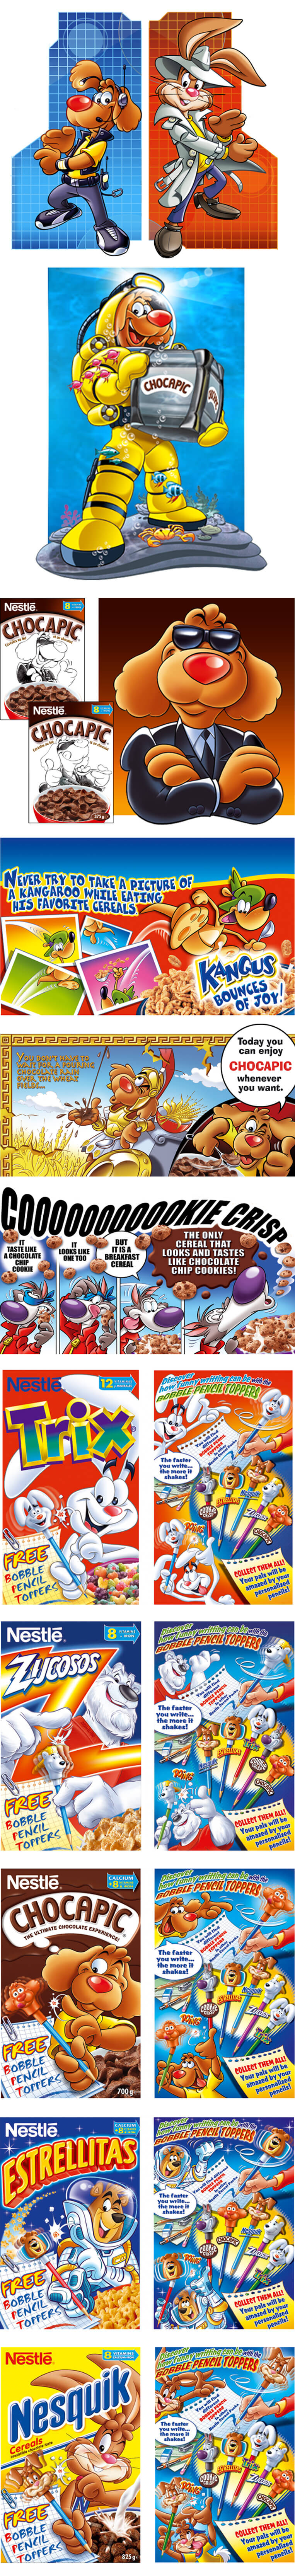 Cereal Packaging 1